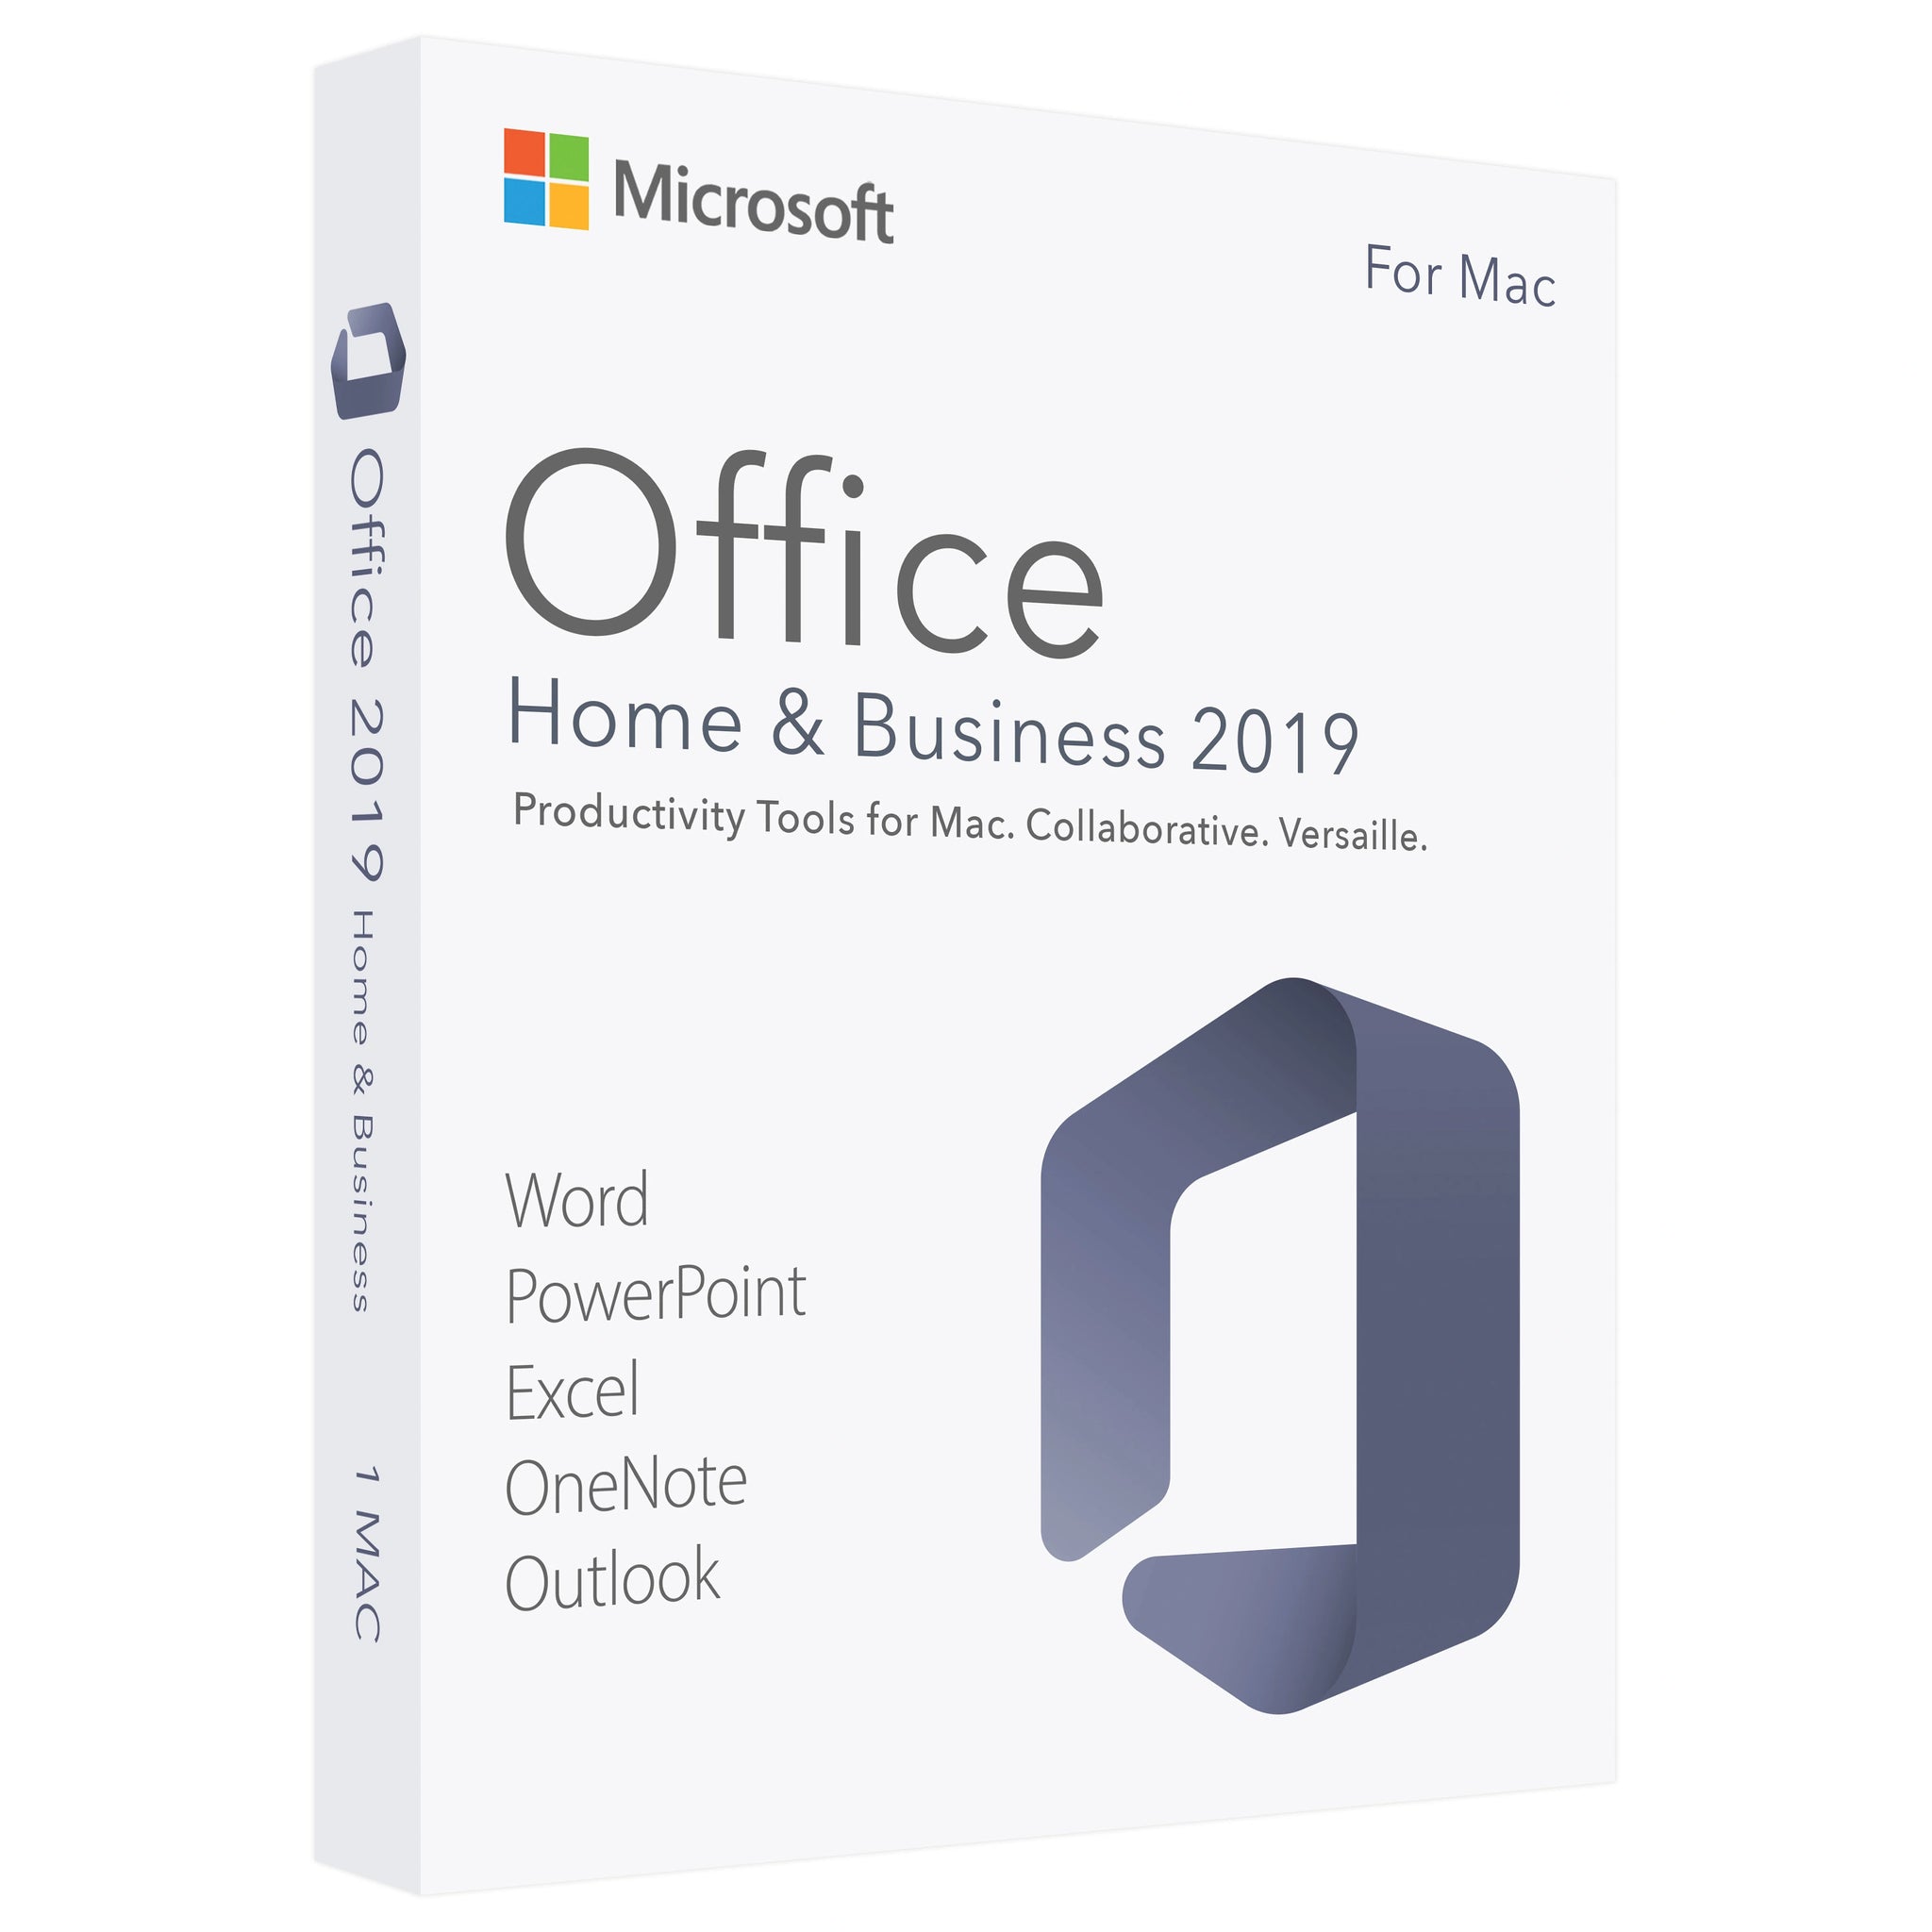 Microsoft Office 2021 Home & Business - Lifetime License Key for 1 MAC